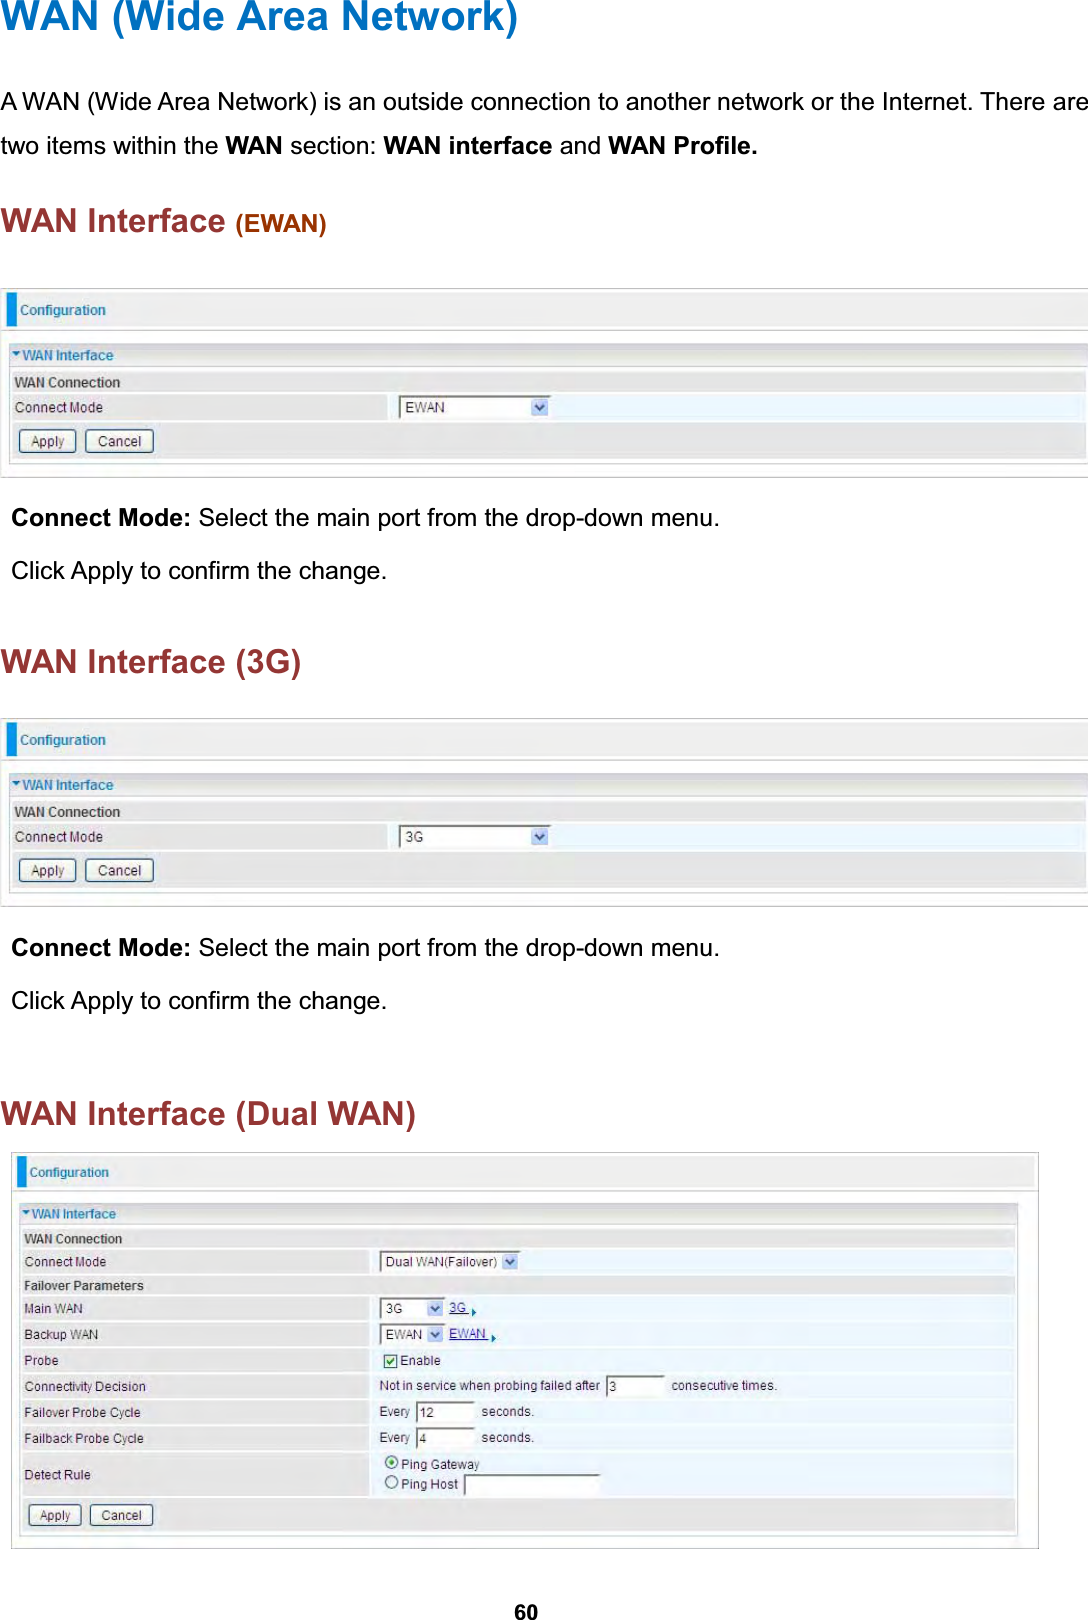  60 WAN (Wide Area Network) A WAN (Wide Area Network) is an outside connection to another network or the Internet. There are two items within the WAN section: WAN interface and WAN Profile.  WAN Interface (EWAN)    Connect Mode: Select the main port from the drop-down menu.  Click Apply to confirm the change.   WAN Interface (3G)    Connect Mode: Select the main port from the drop-down menu.  Click Apply to confirm the change.   WAN Interface (Dual WAN)   